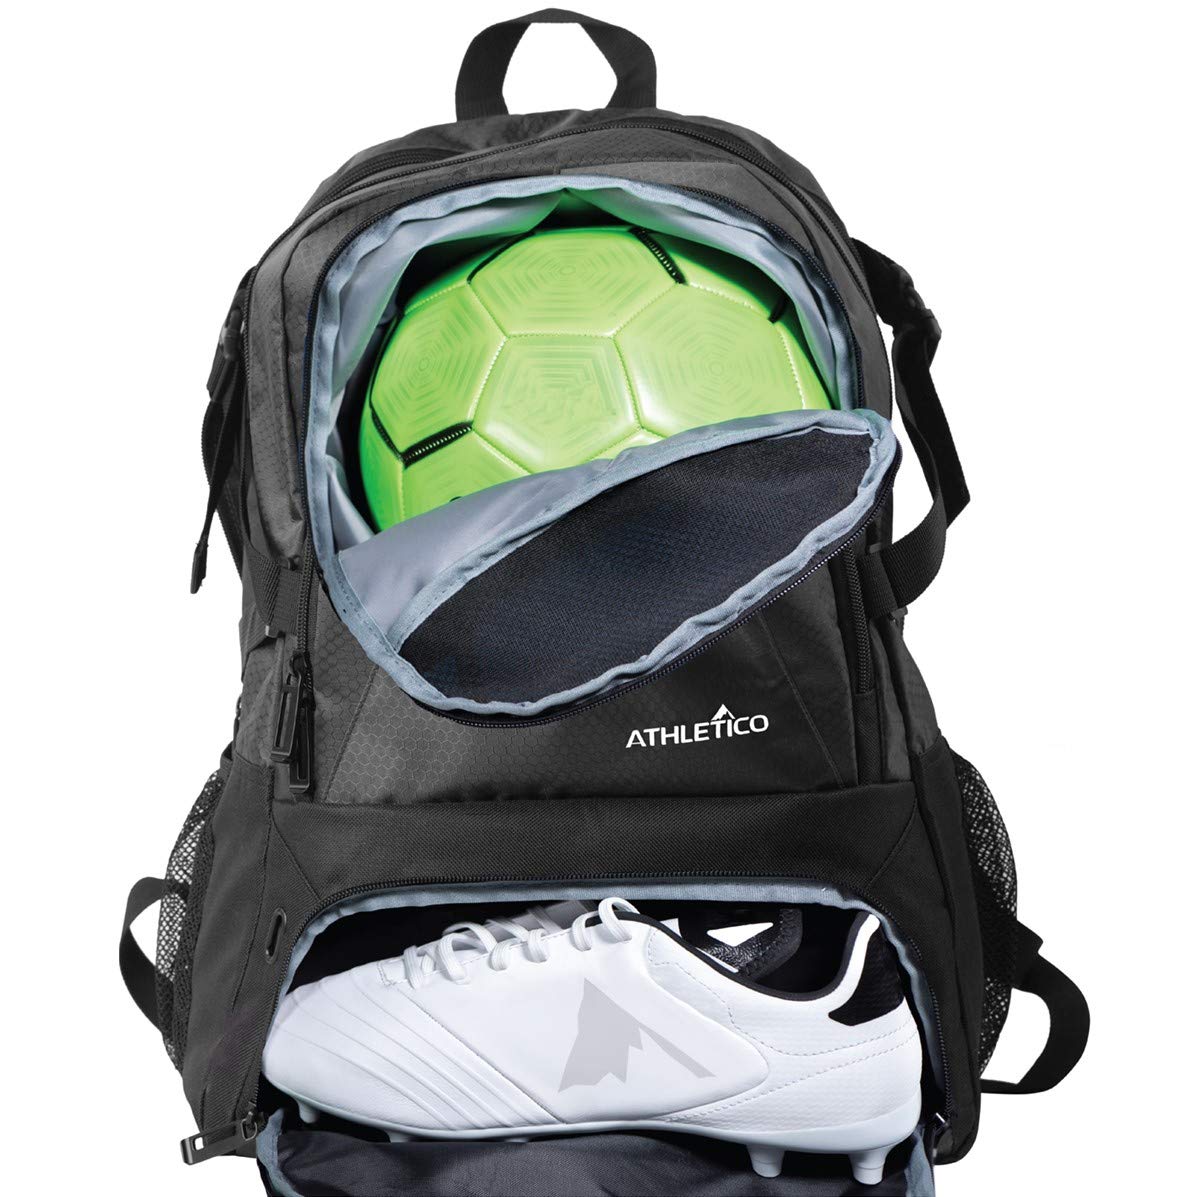 Athletico National Soccer Bag - Backpack for Soccer, Basketball & Football Includes Separate Cleat and Ball Holder  - Acceptable